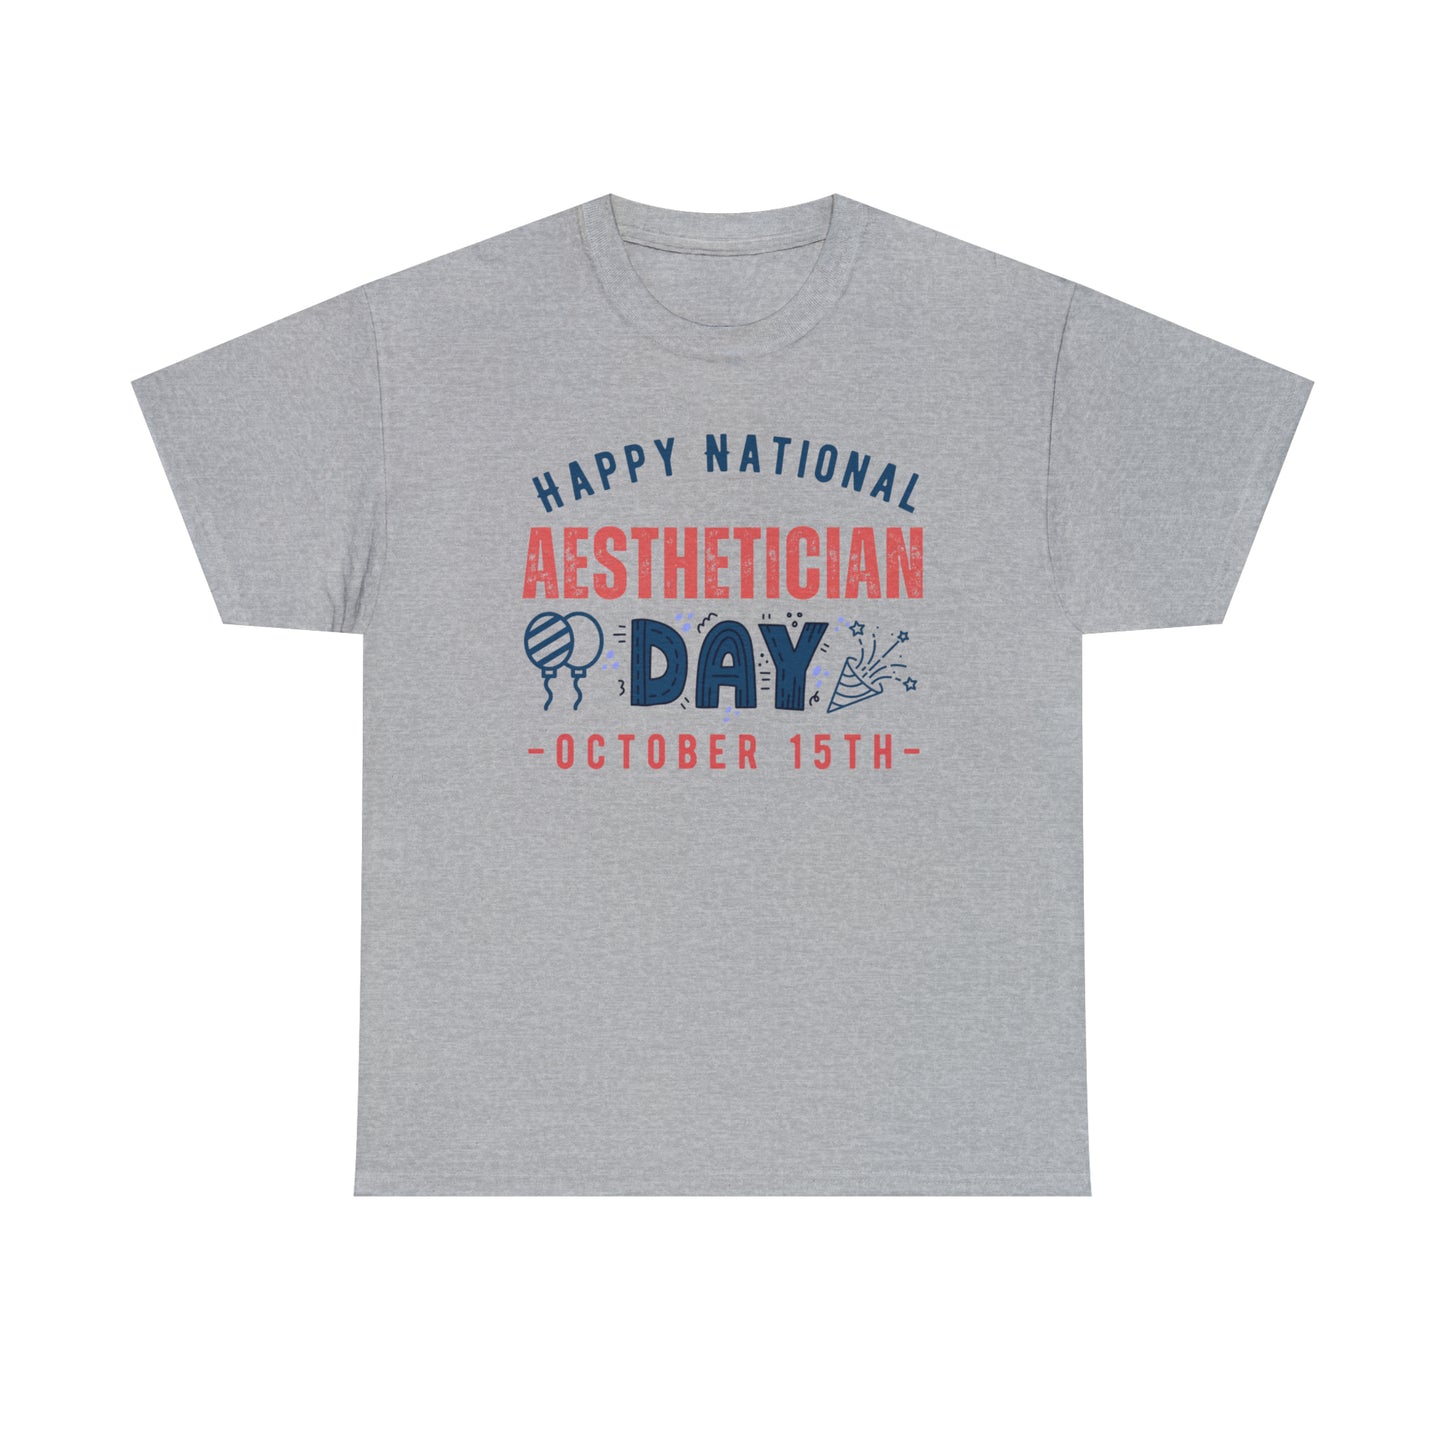 Happy National Aesthetician Day October 15th Occupation T-Shirt | Unisex Tee Shirt